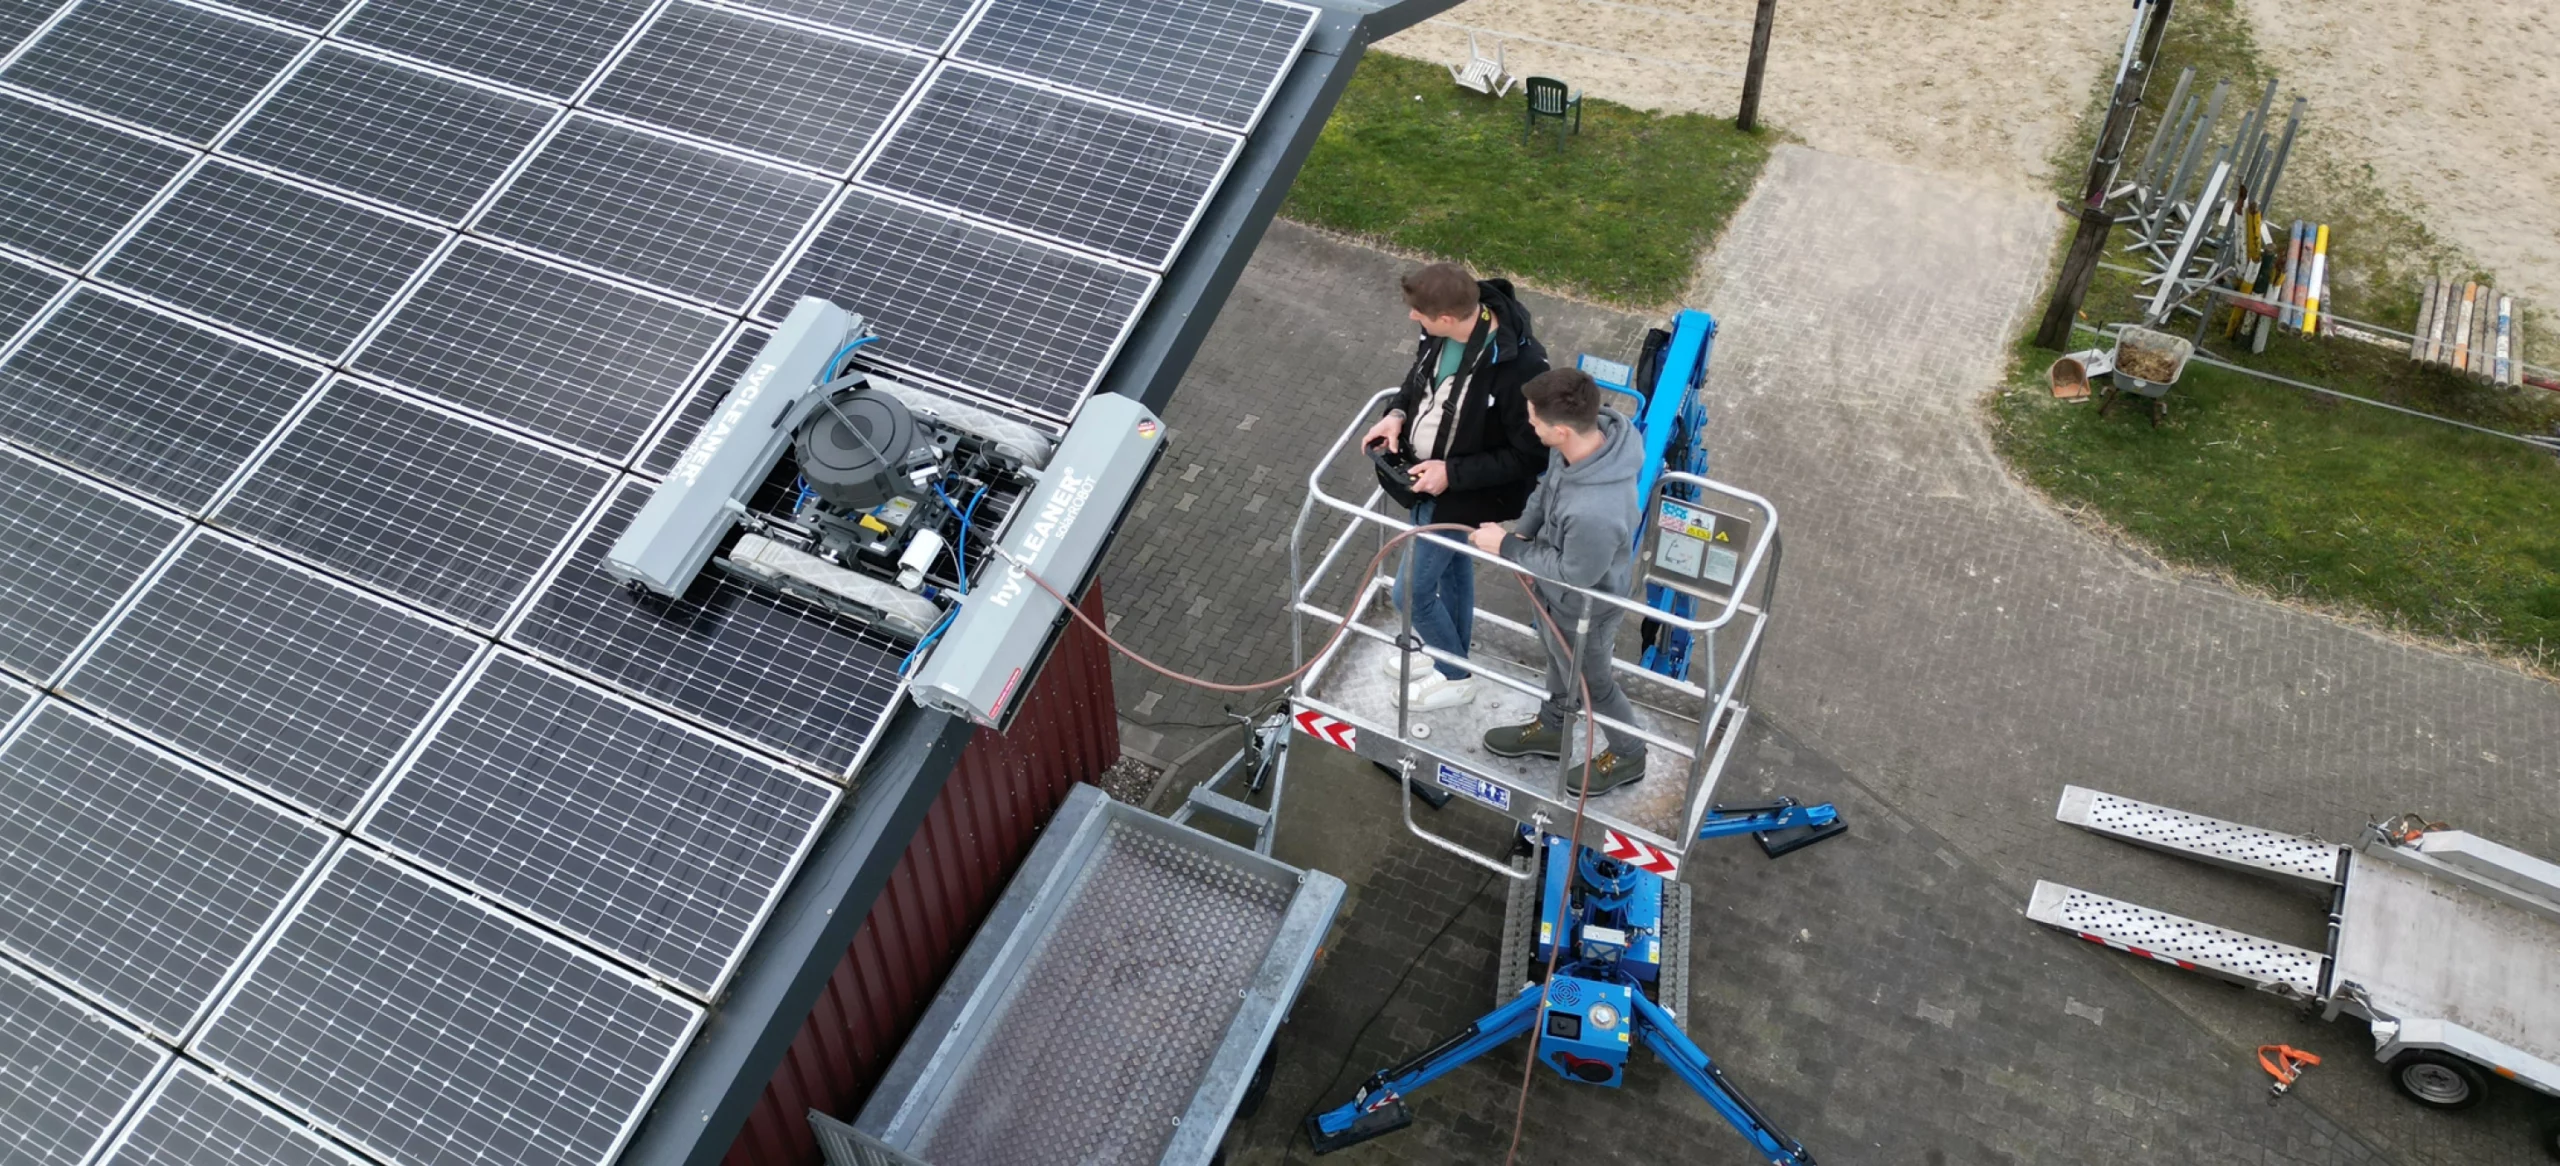 Solar panel cleaning from above with the PV cleaning robot solarROBOT